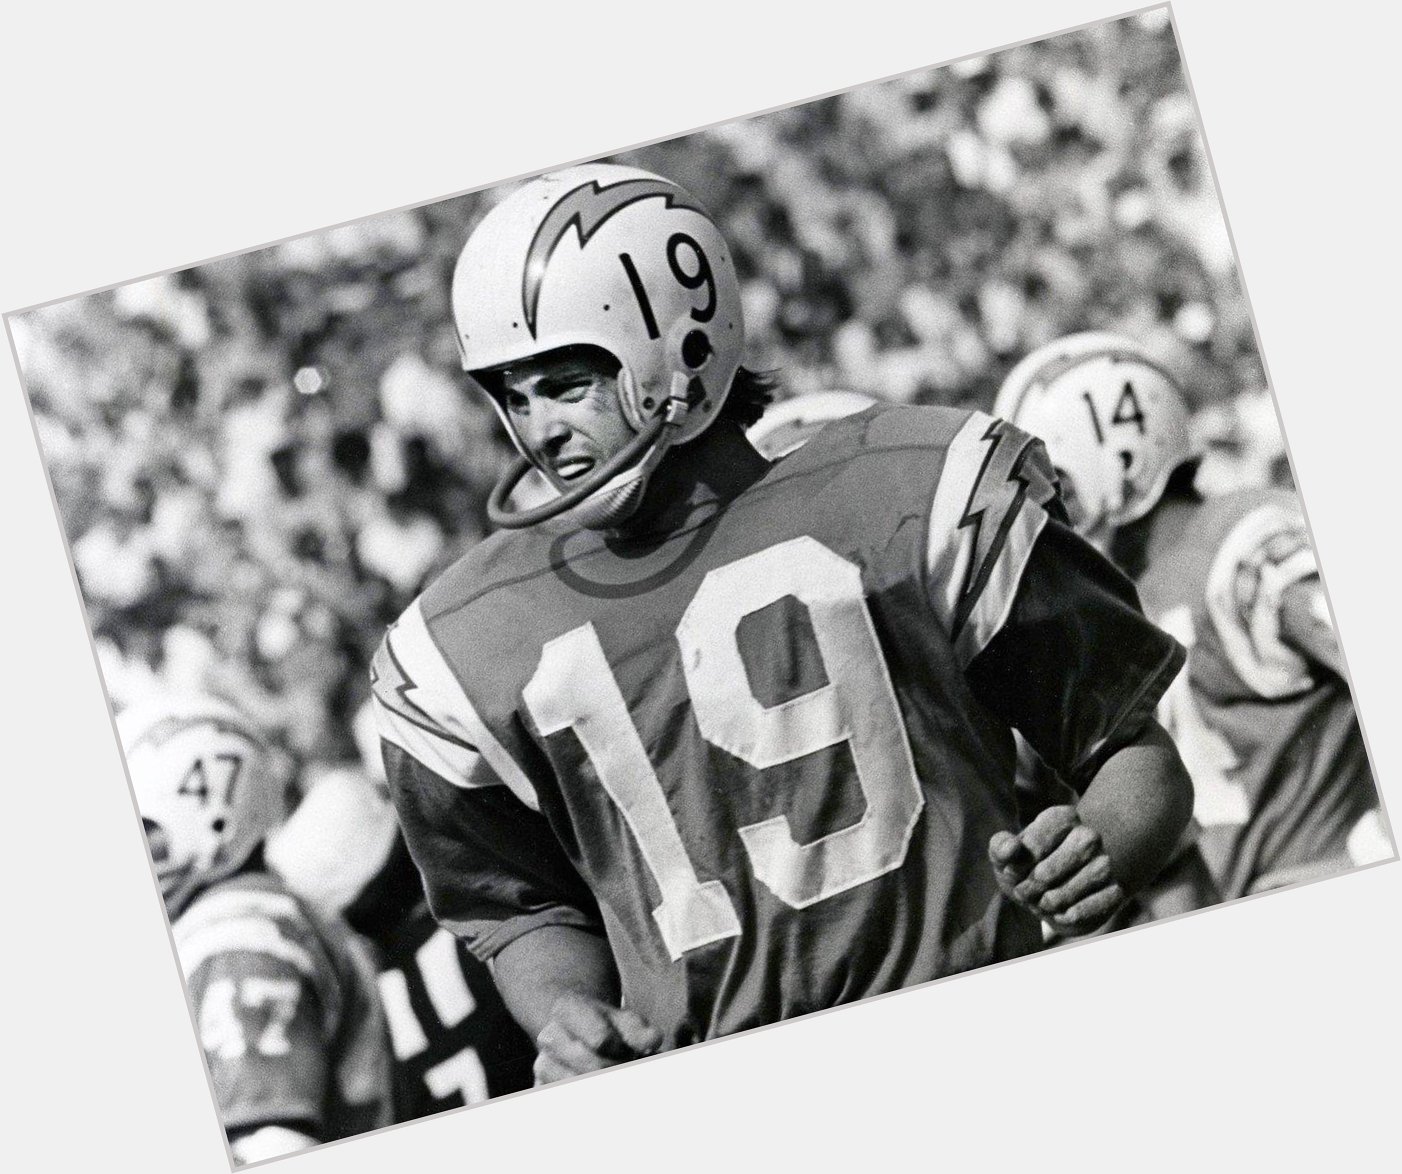 Happy BDay to our lifetime member and Hall of Famer Lance Alworth! 